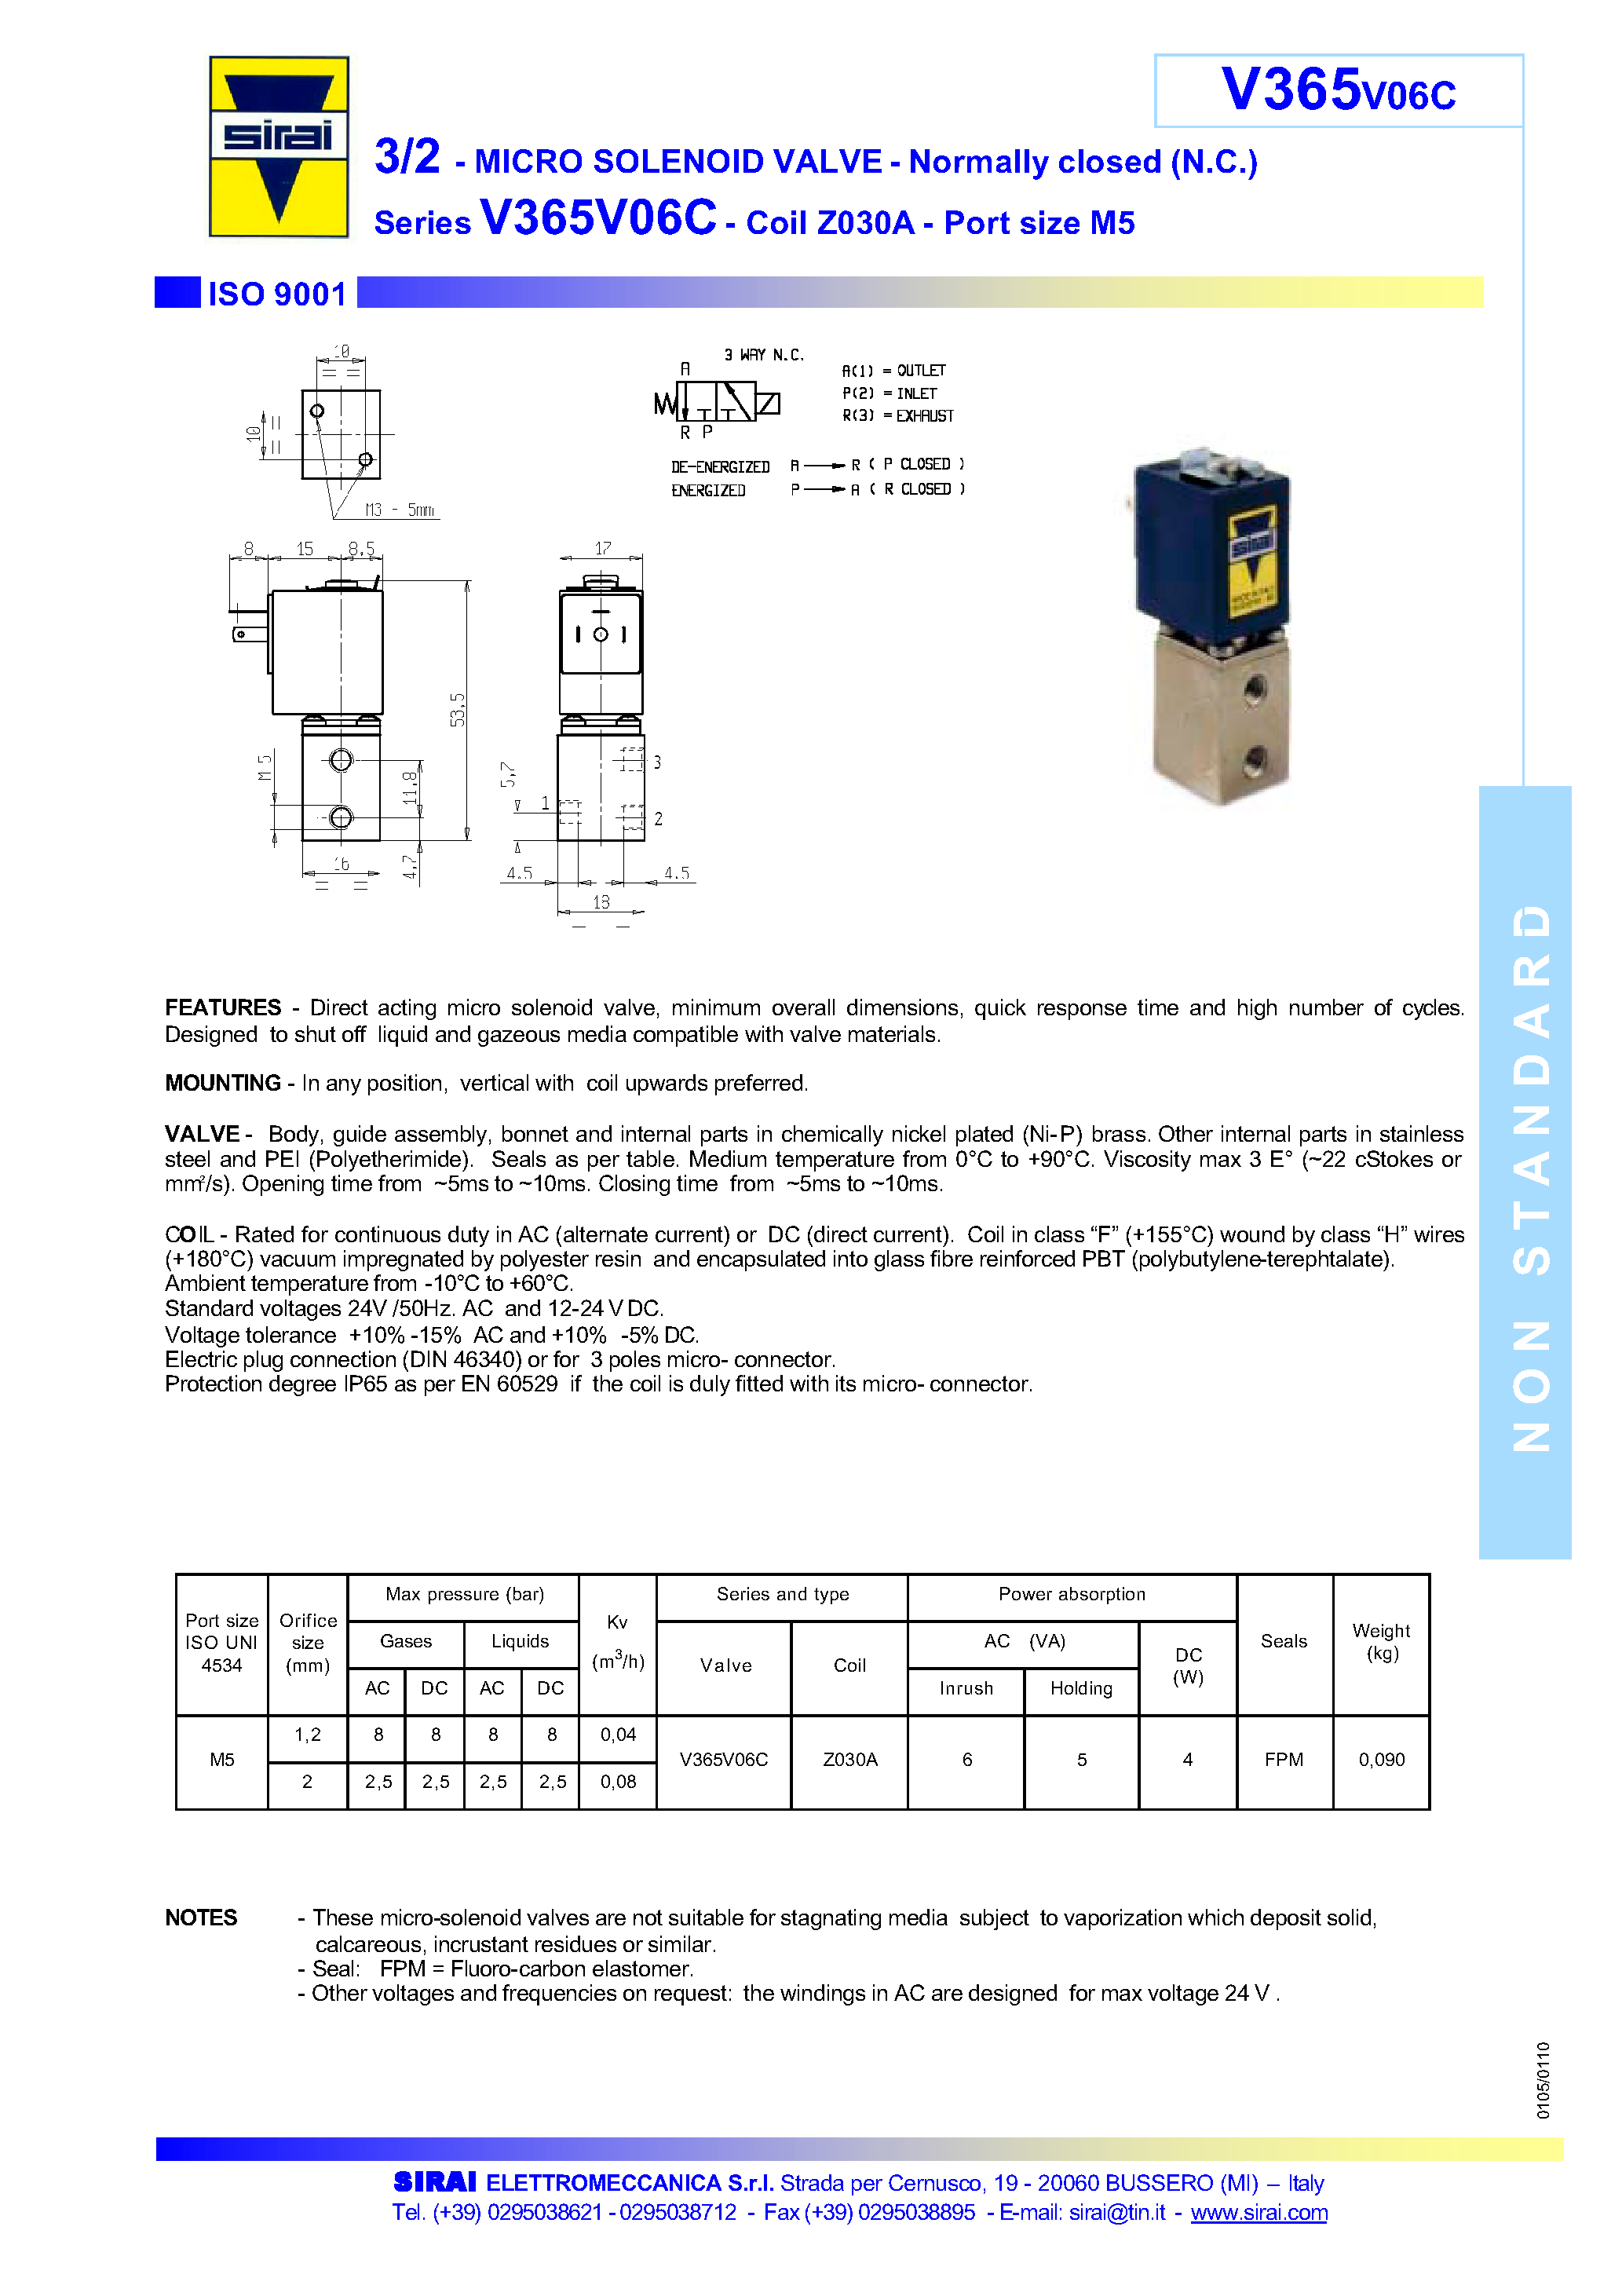 Datasheet V365-V06C - 3/2 - MICRO SOLENOID VALVE - Normally closed (N.C.) page 1